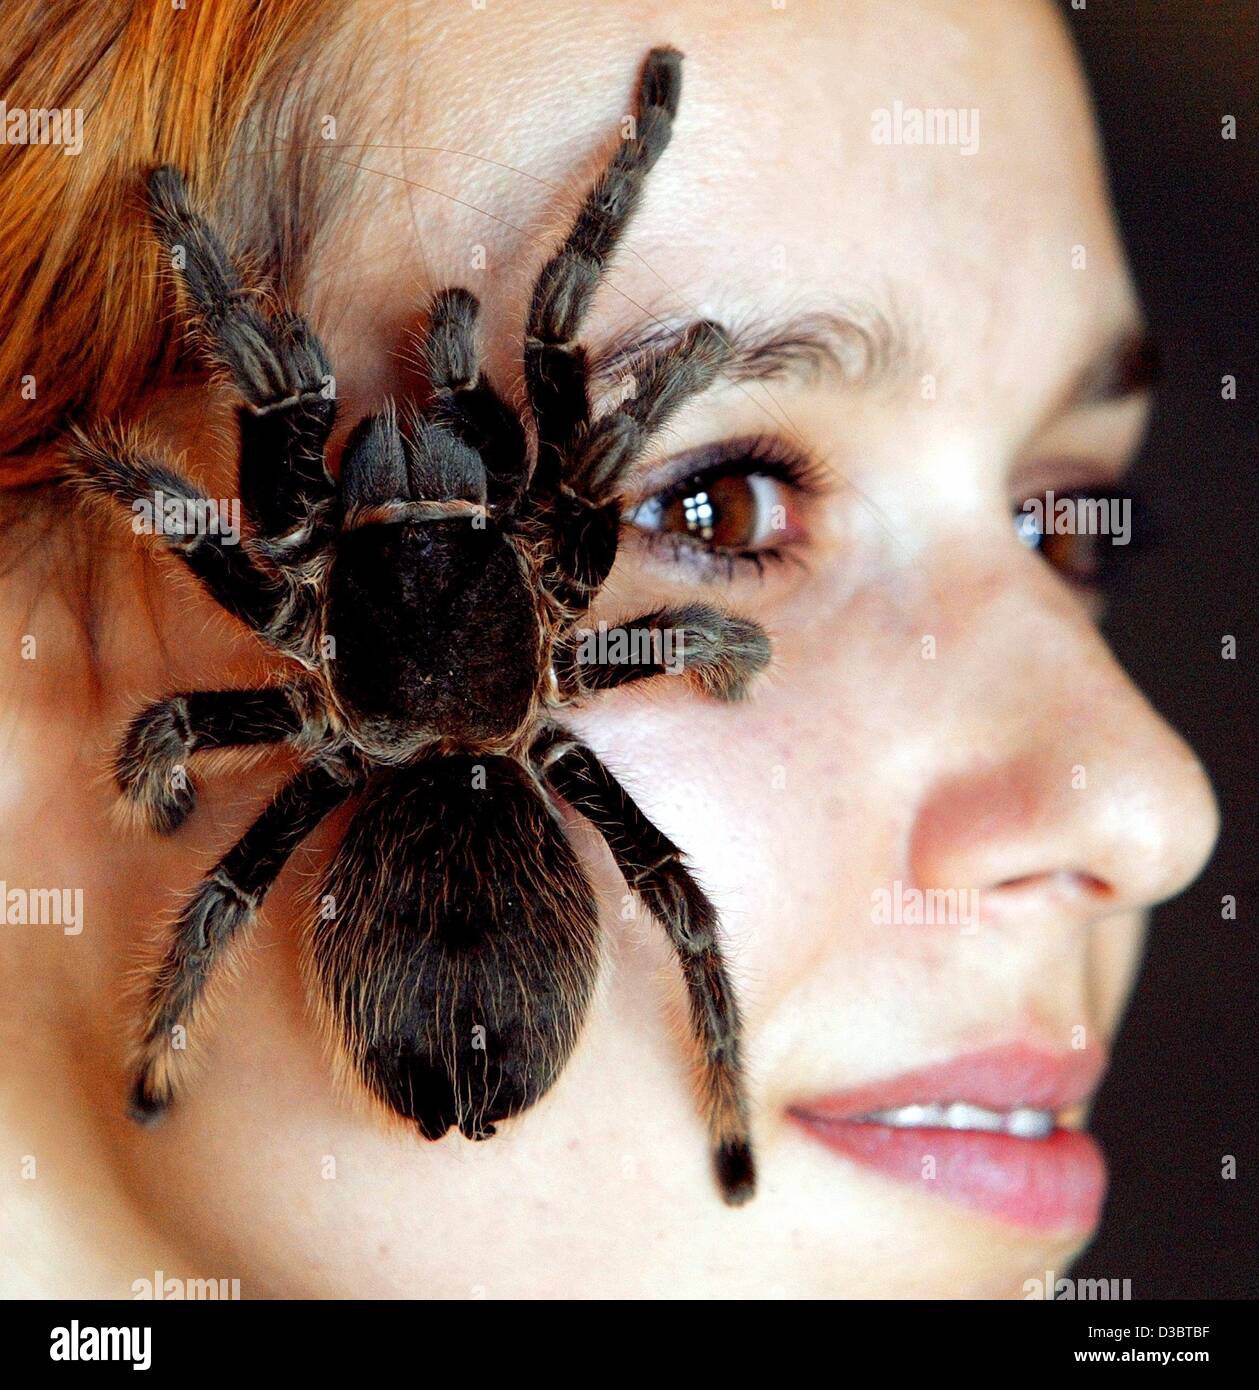 (dpa) - Nanette is a tough woman as she lets a bird-eating spider (Theraphosa leblondi Goliath) crawl a cross her cheek in the run-up to the 'Fascinating World of Spiders' special exhibition at the Museum for Natural History in leipzig, Germany, 10 September 2003. These spiders are normally found in Stock Photo